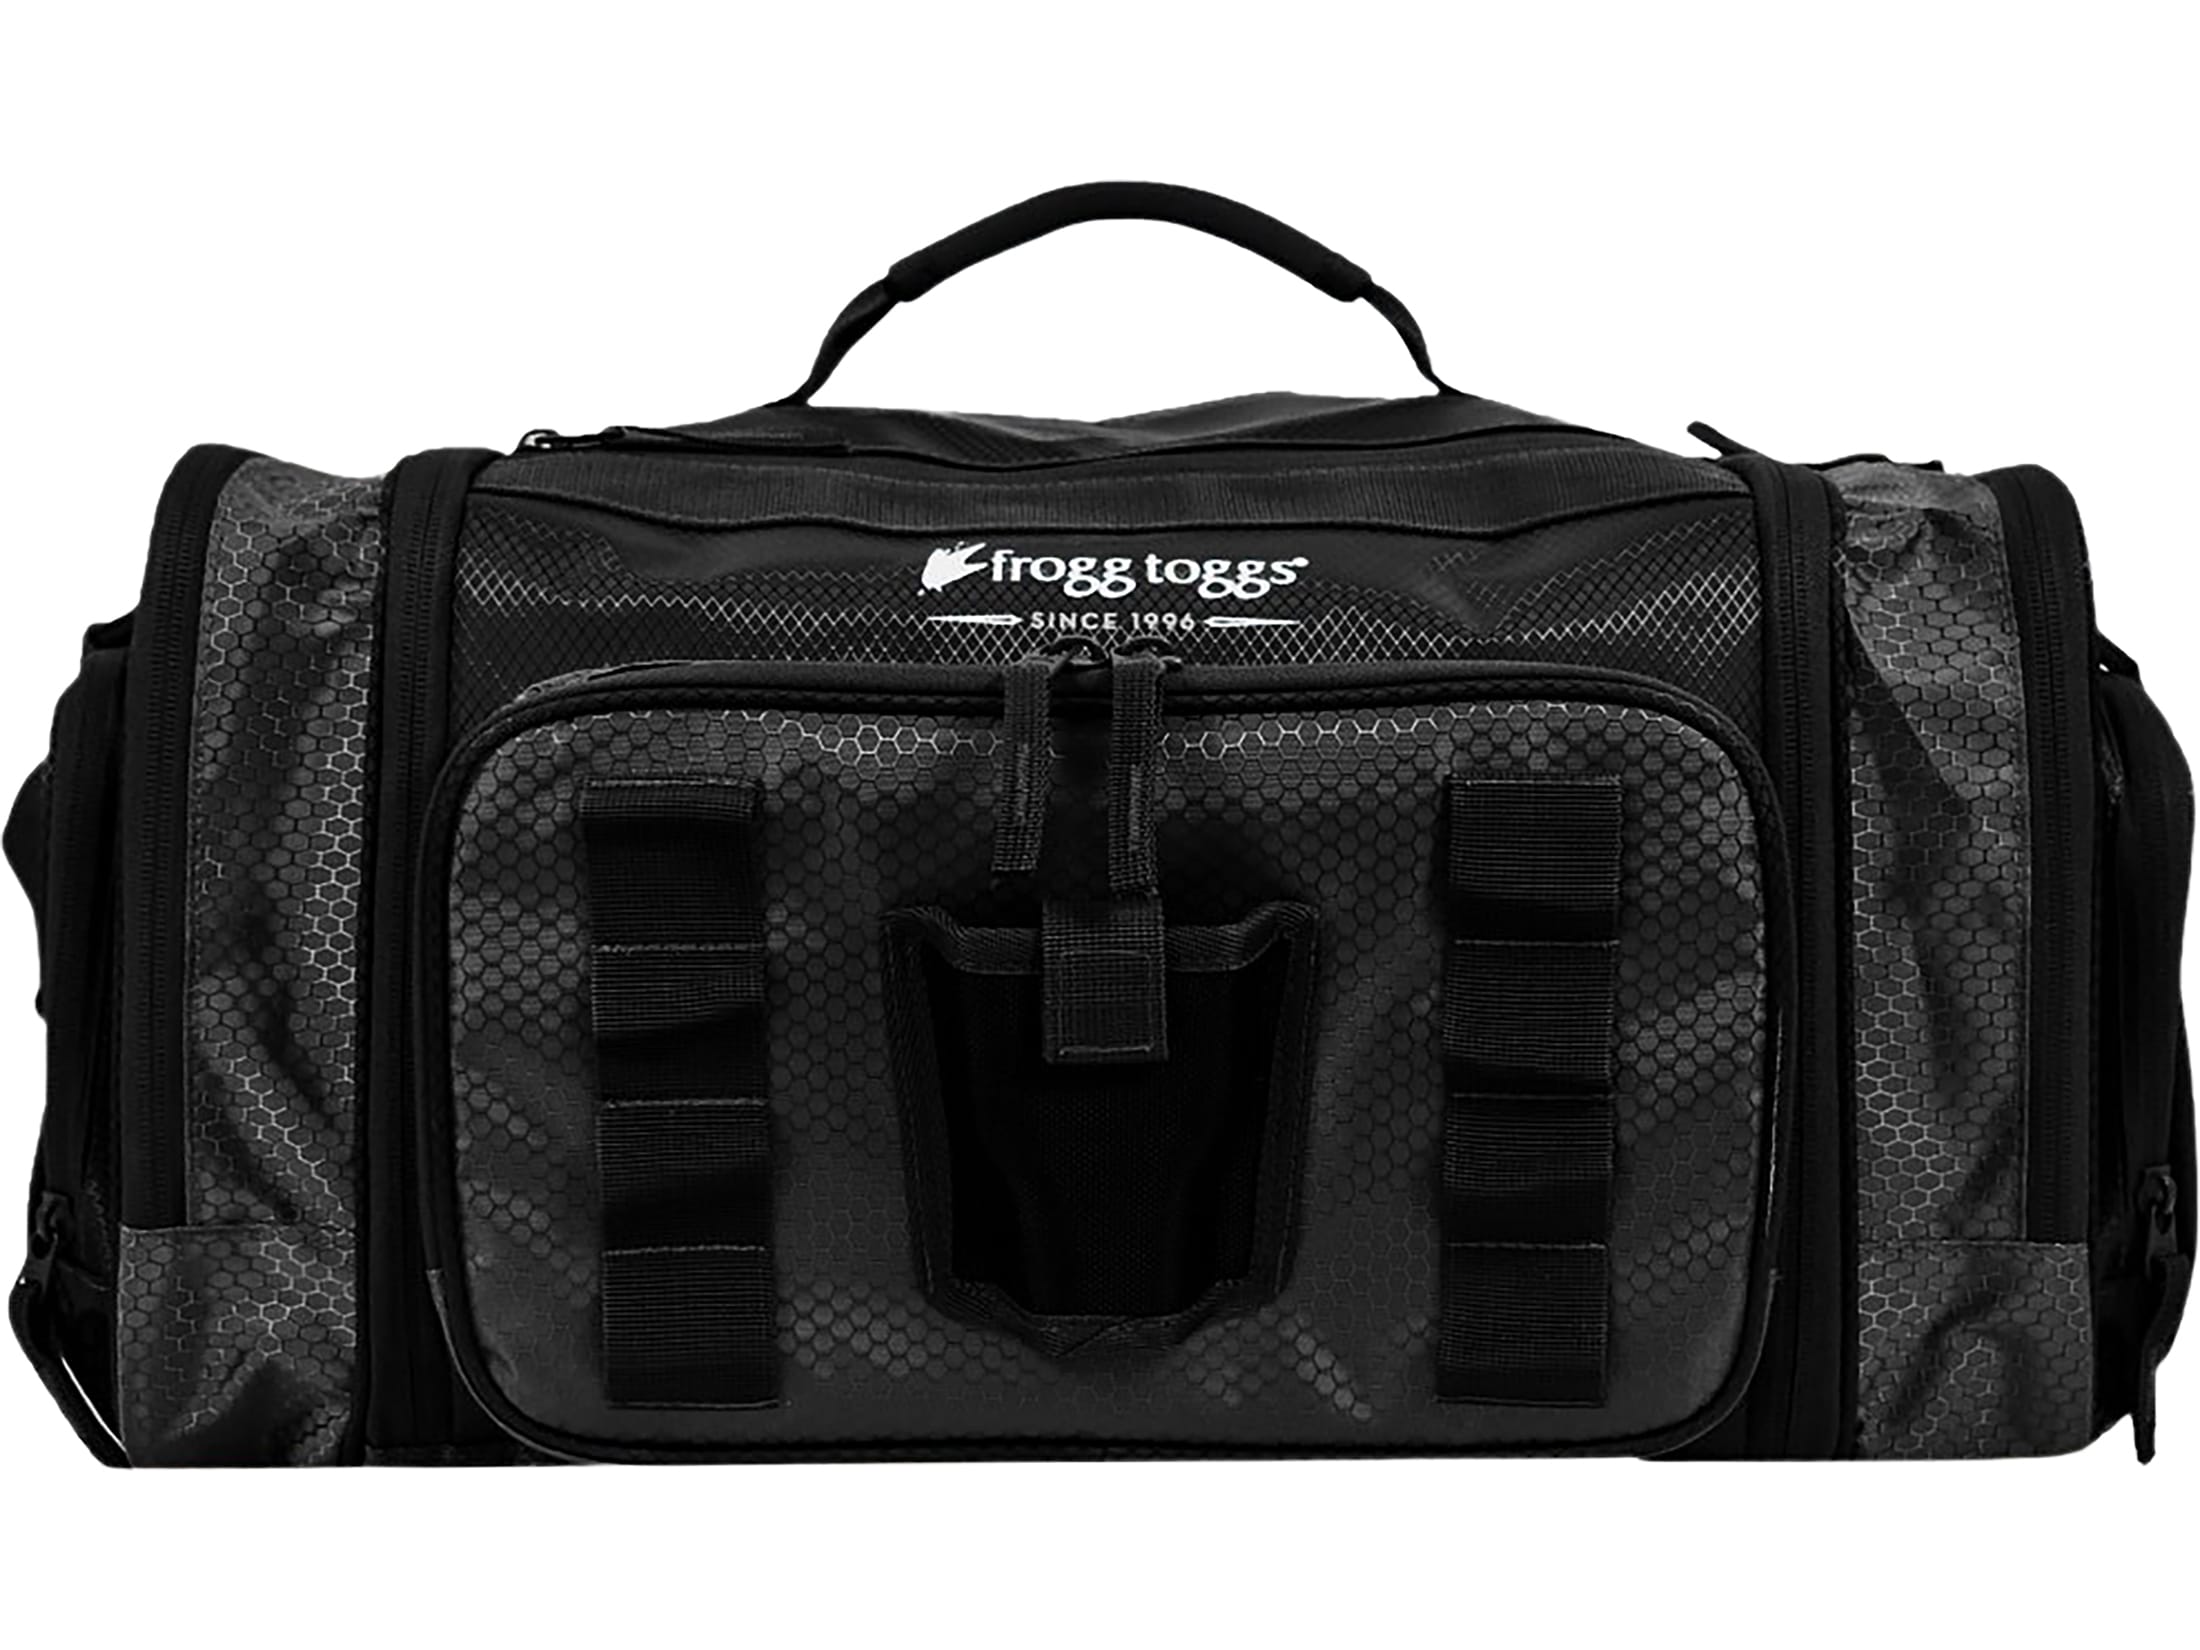 Frogg Toggs 3600 Tackle Bag Blue